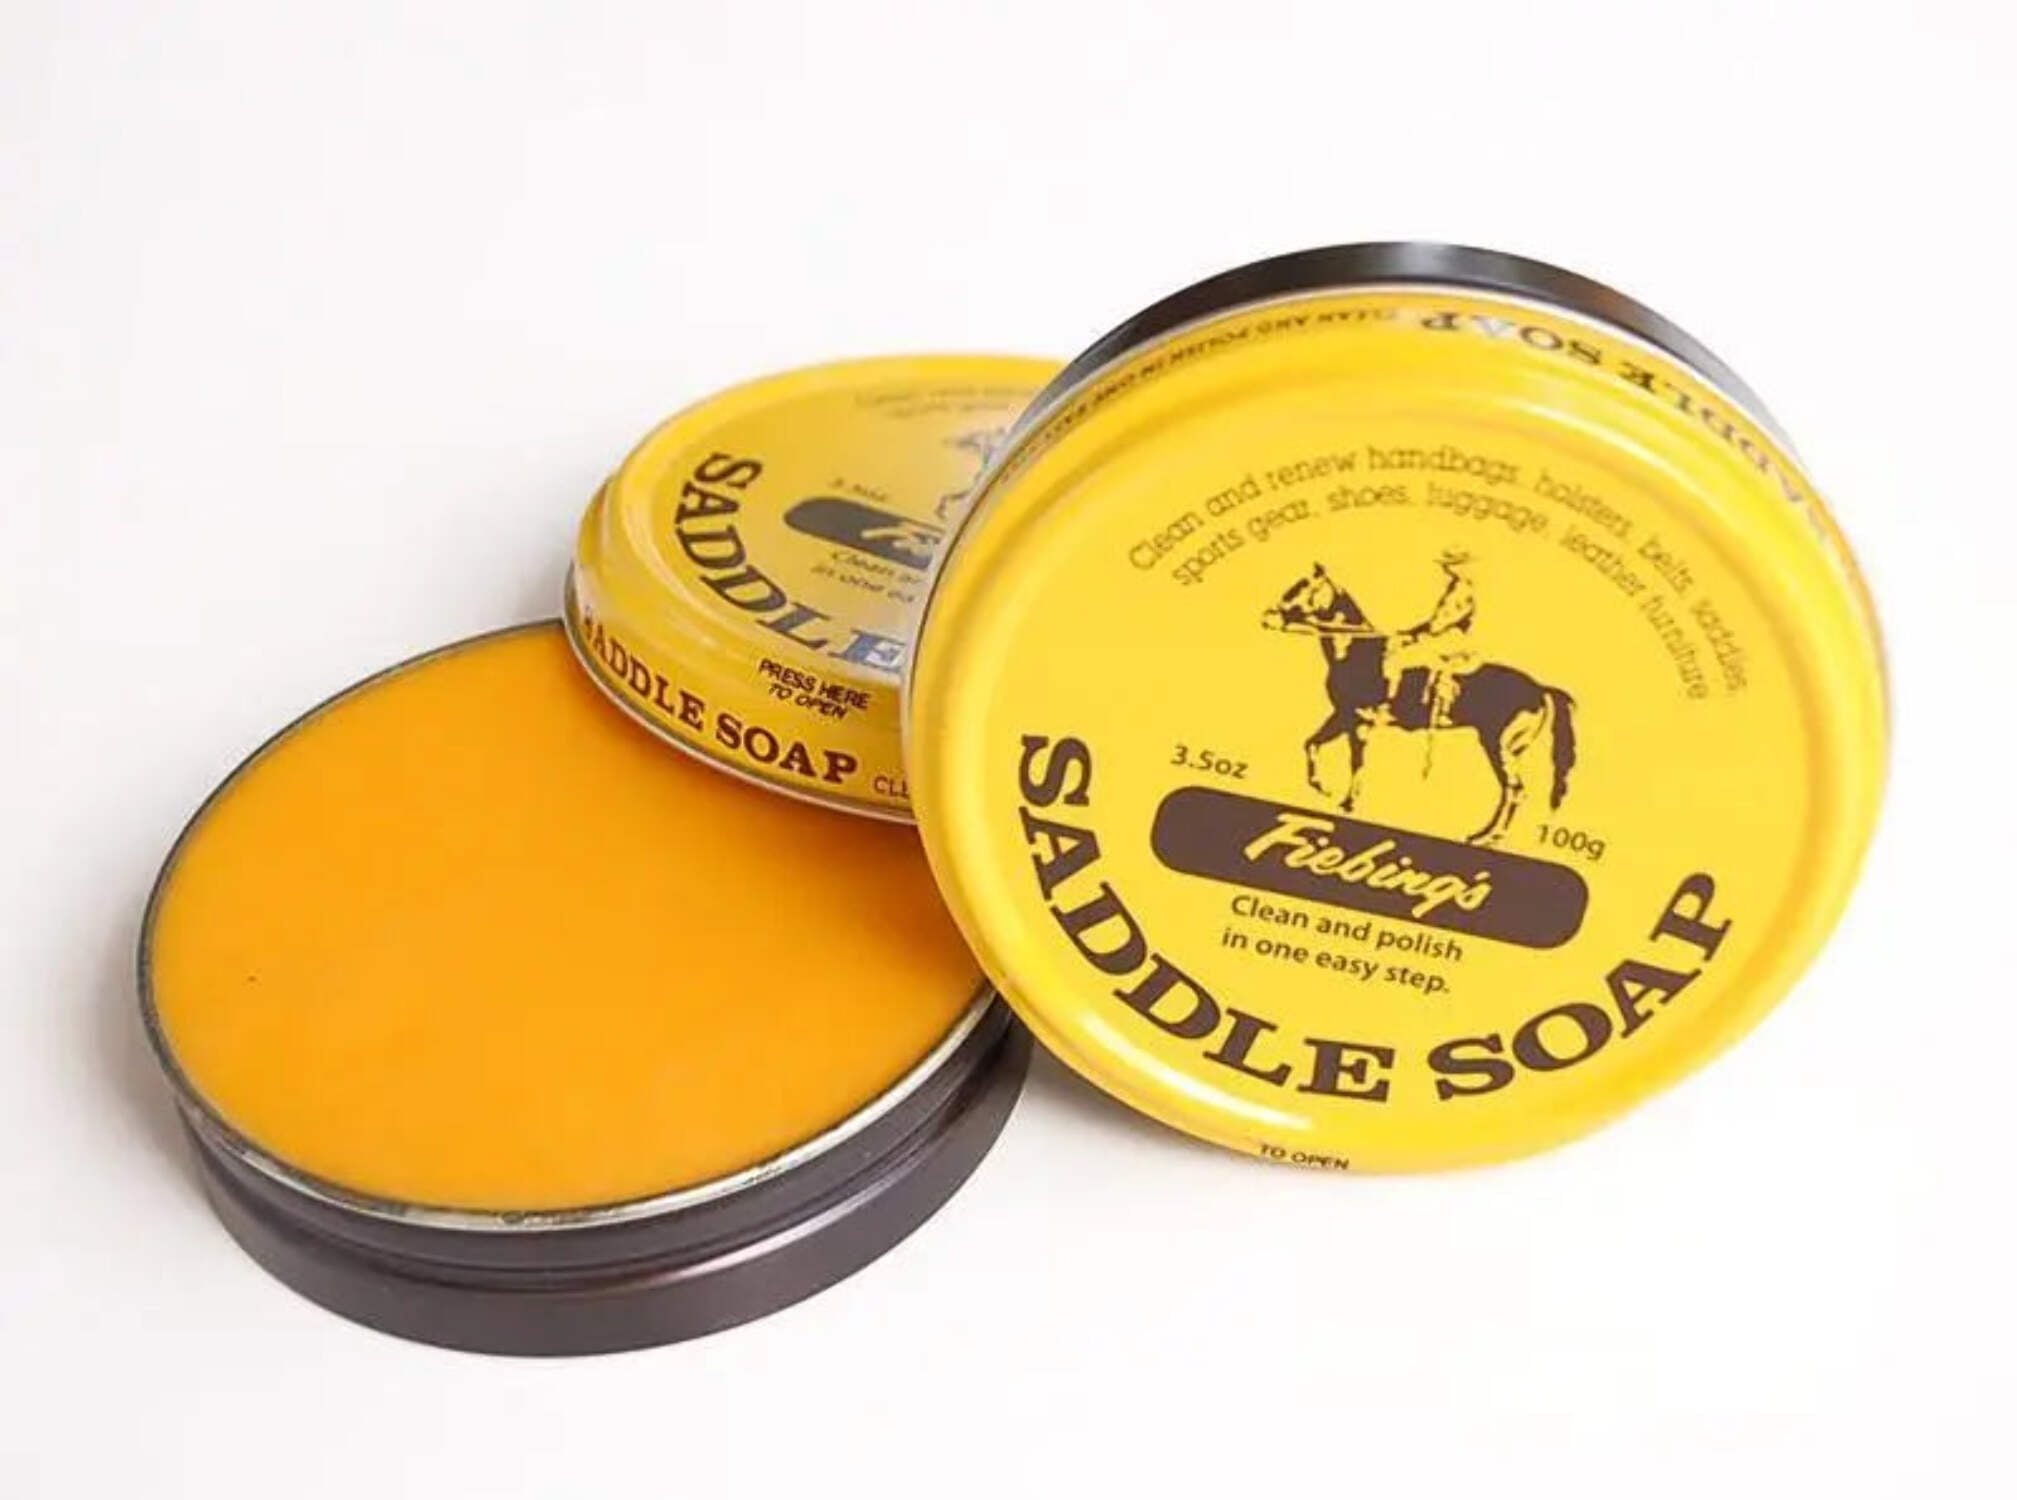 Fiebings Saddle Soap – Panhandle Leather Co.